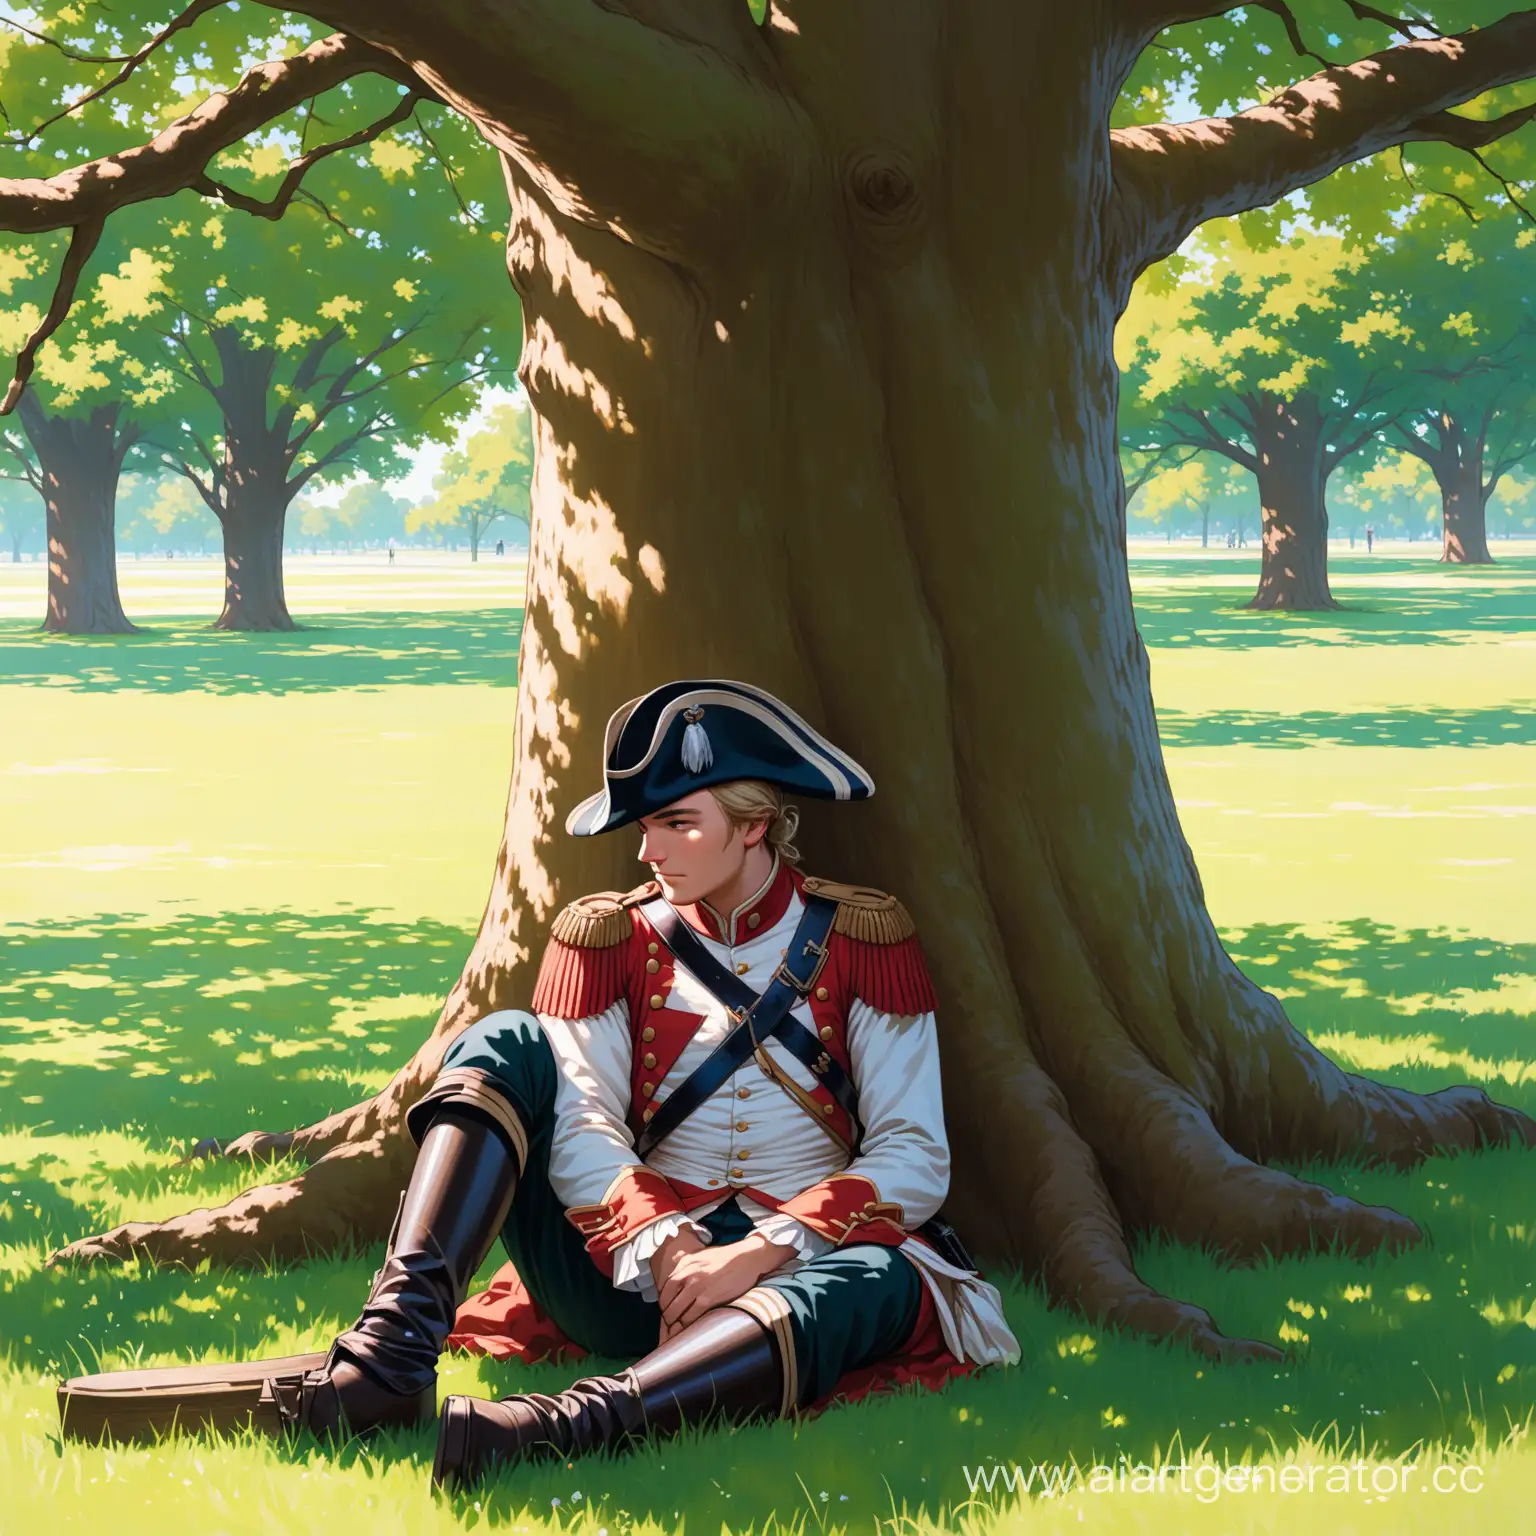 Soldier-from-1772-Leaning-Against-Oak-Tree-in-Park-Grass